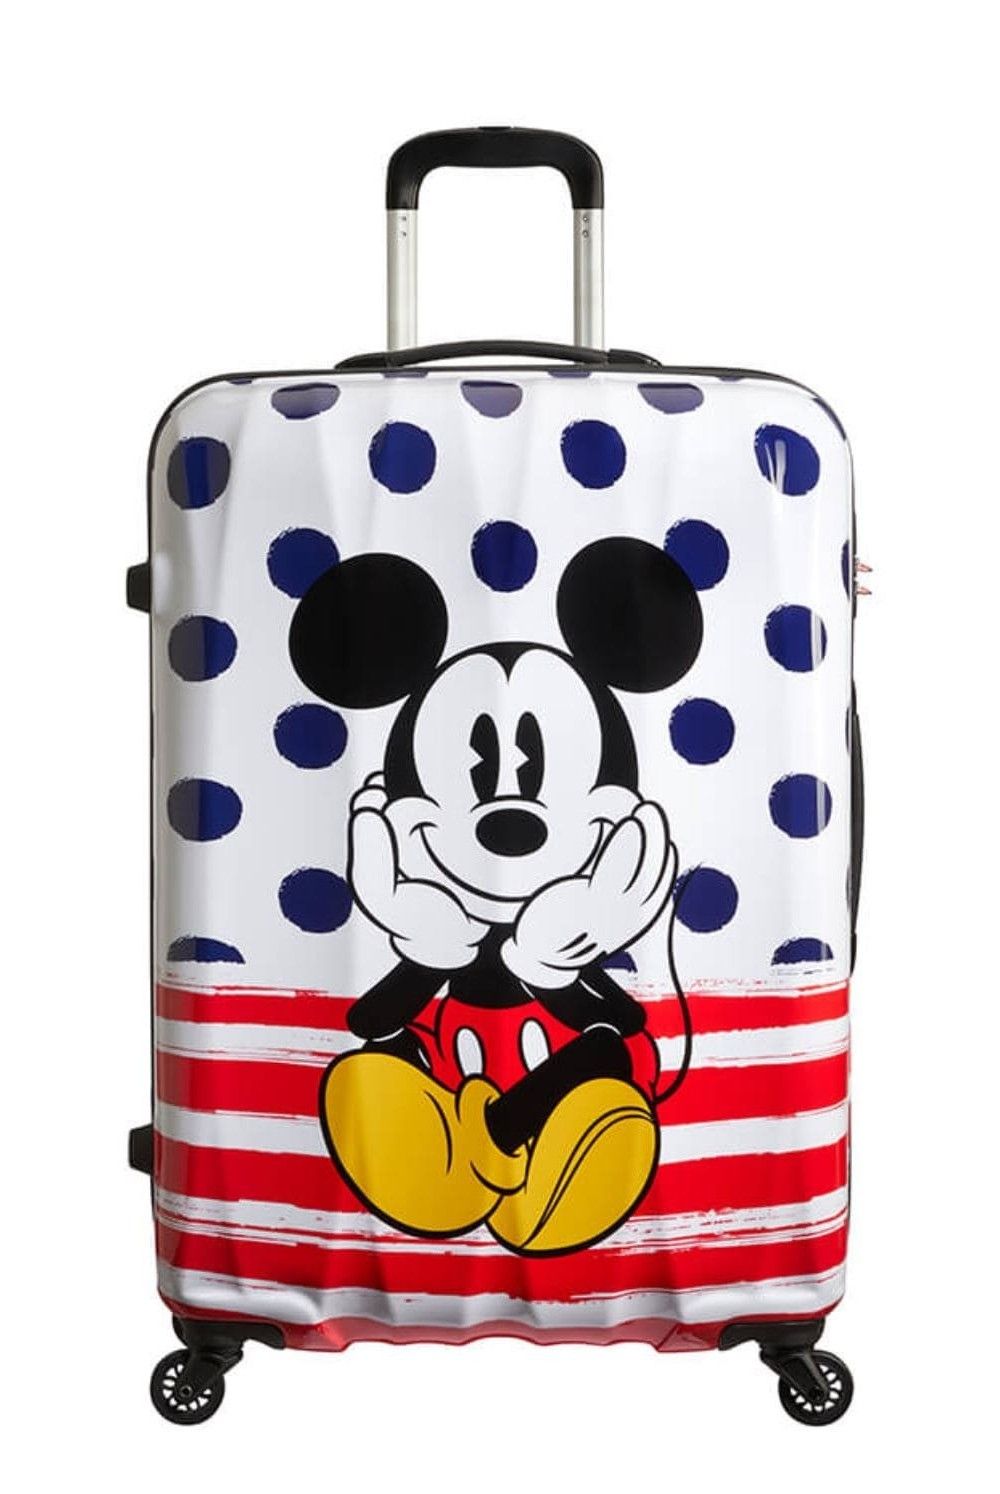 AT Kinderkoffer Mickey Blue Dots 75cm 88 Liter